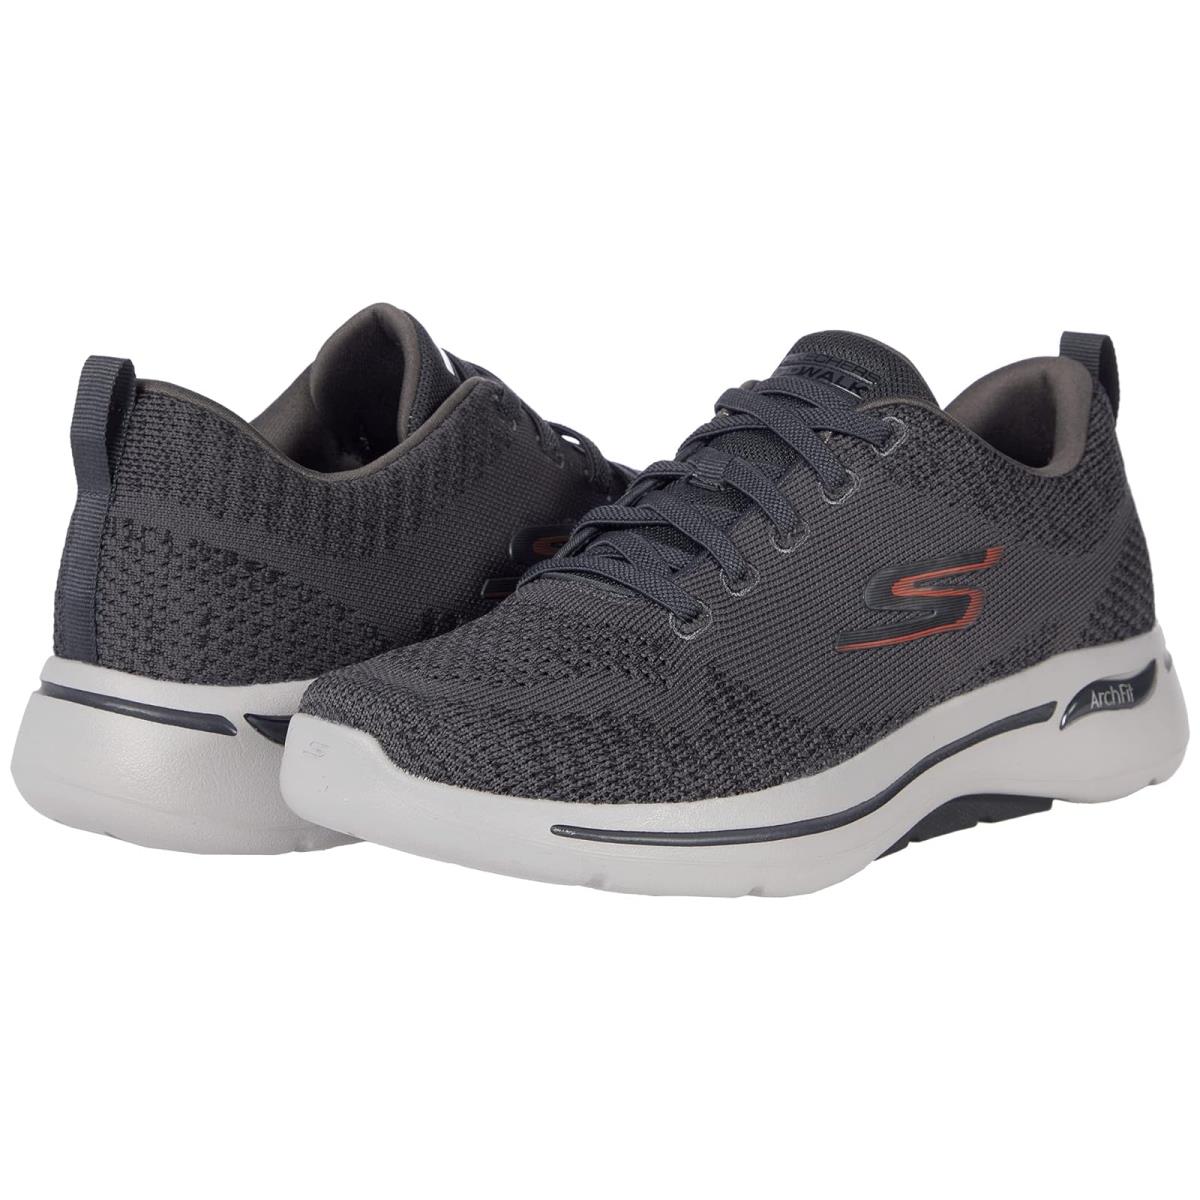 Man`s Shoes Skechers Performance Go Walk Arch Fit - 216126 Charcoal